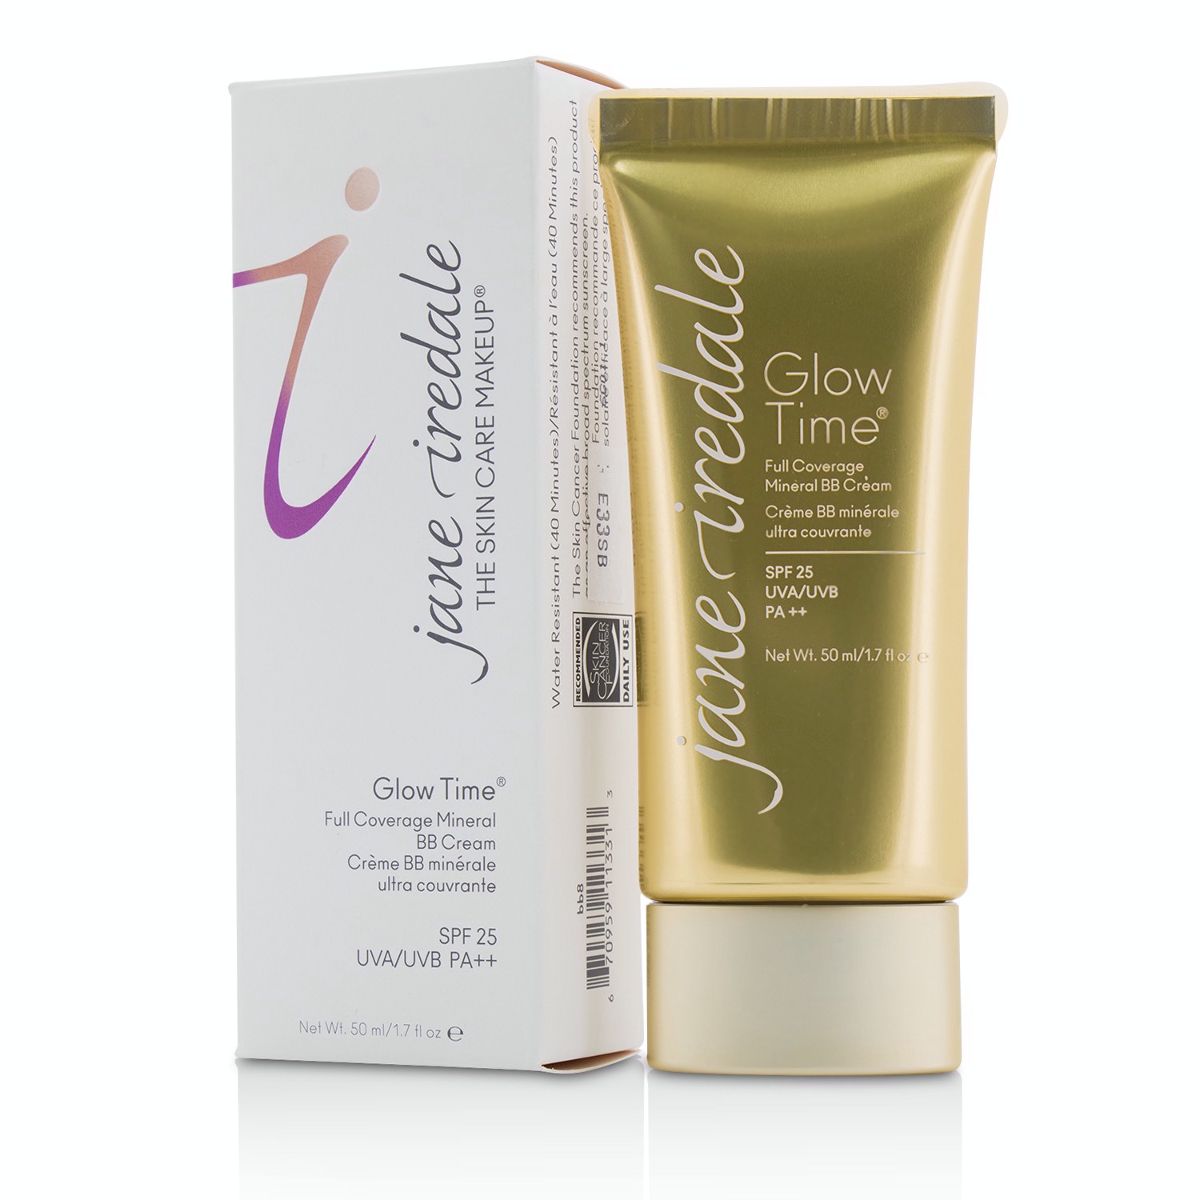 Glow Time Full Coverage Mineral BB Cream SPF 25 - BB8 Jane Iredale Image